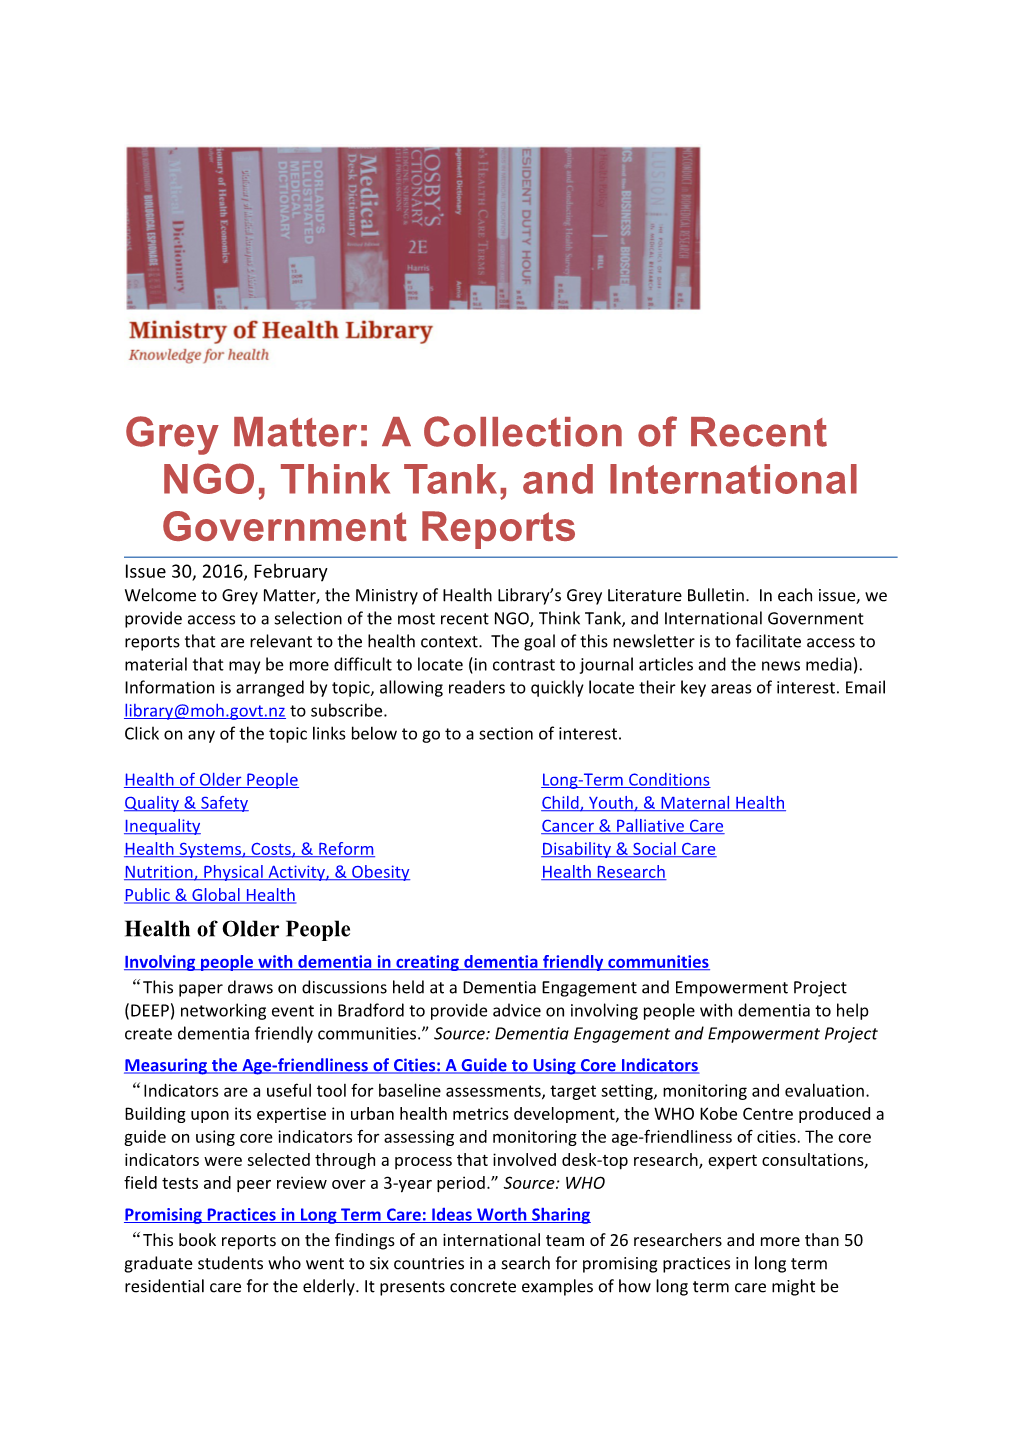 Grey Matter, Issue 7, February 2014